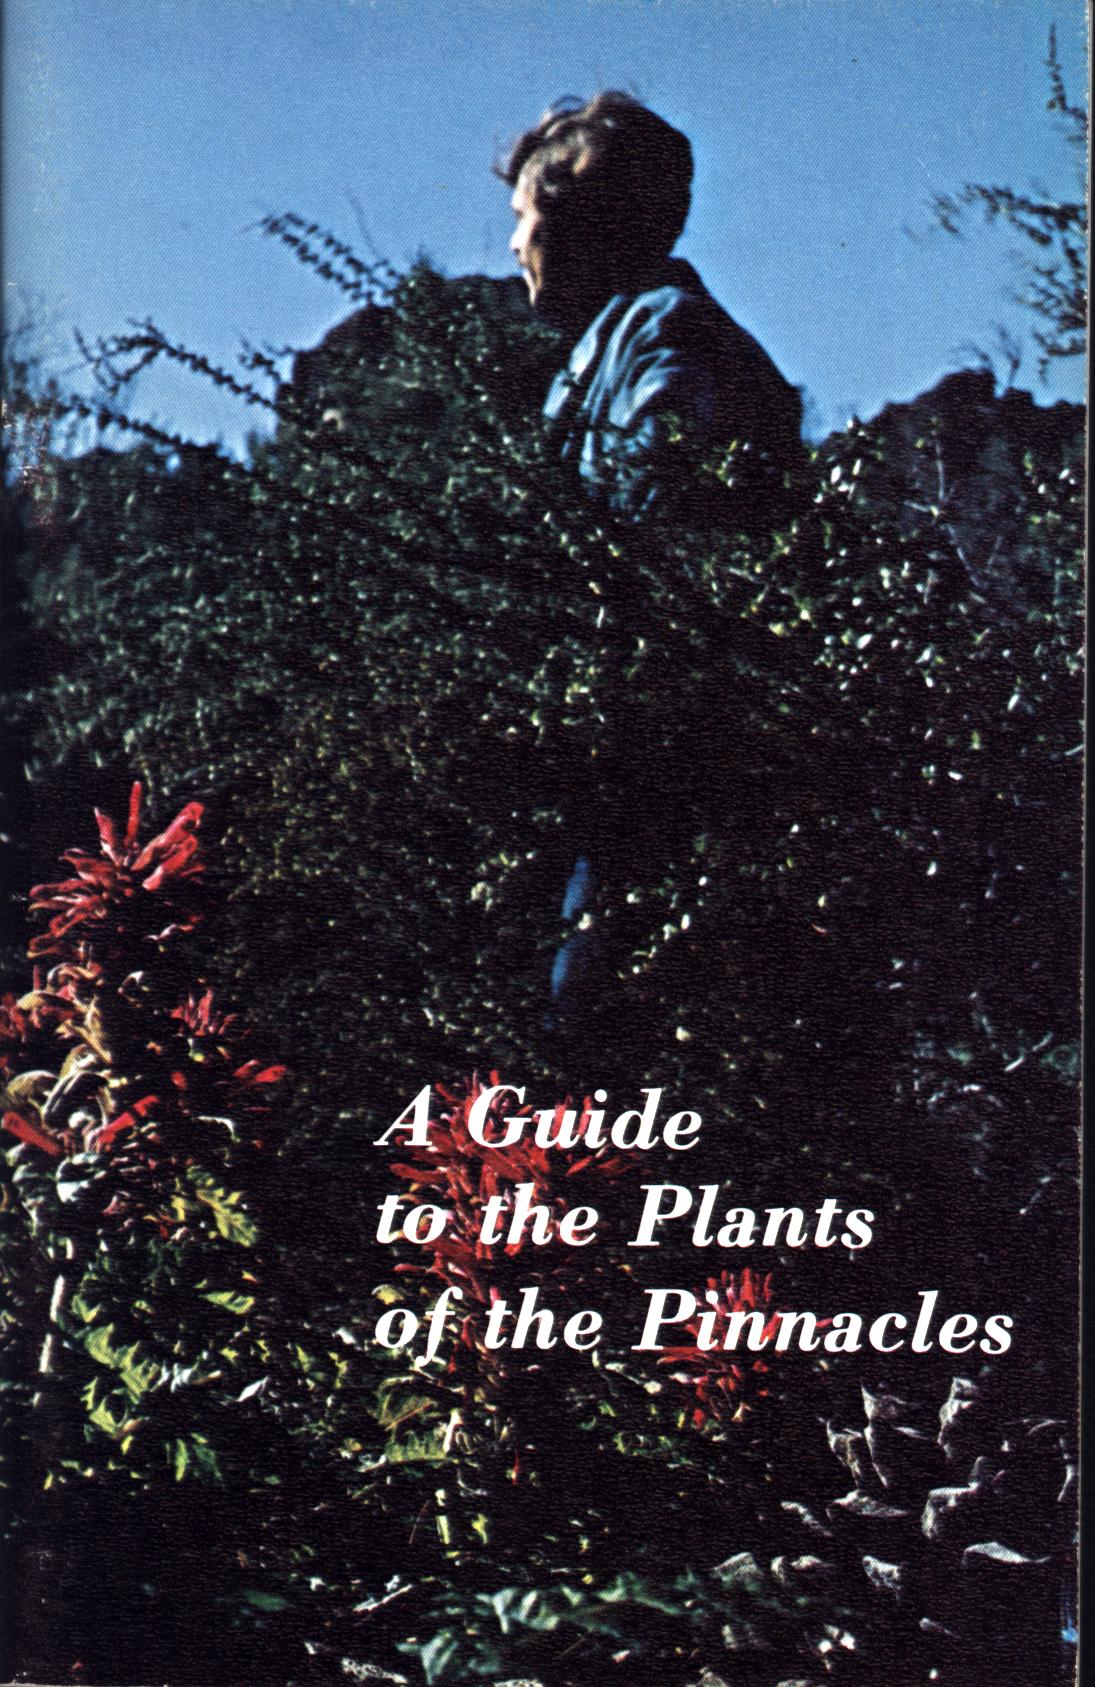 A GUIDE TO THE PLANTS OF THE PINNACLES. 